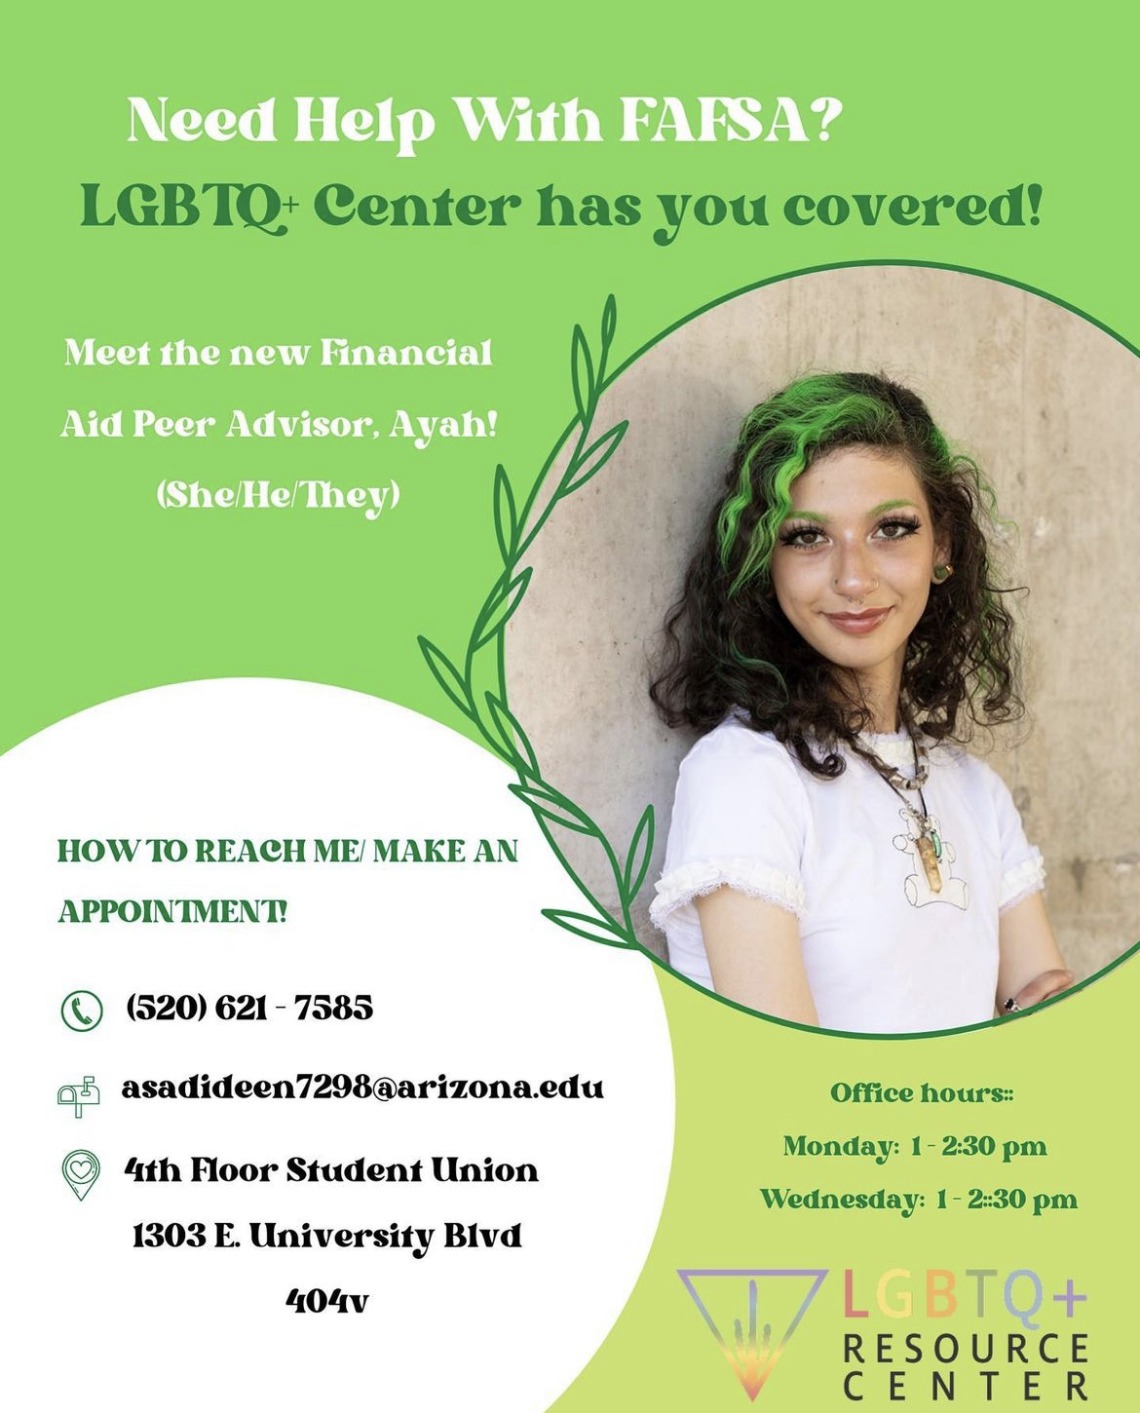 Green flyer with image of Ayah. Text reads: Need help with FAFSA? LGBTQ+RC has you covered. Office hours, Mondays 1-2:30pm, Wednesday 1-2:30pm